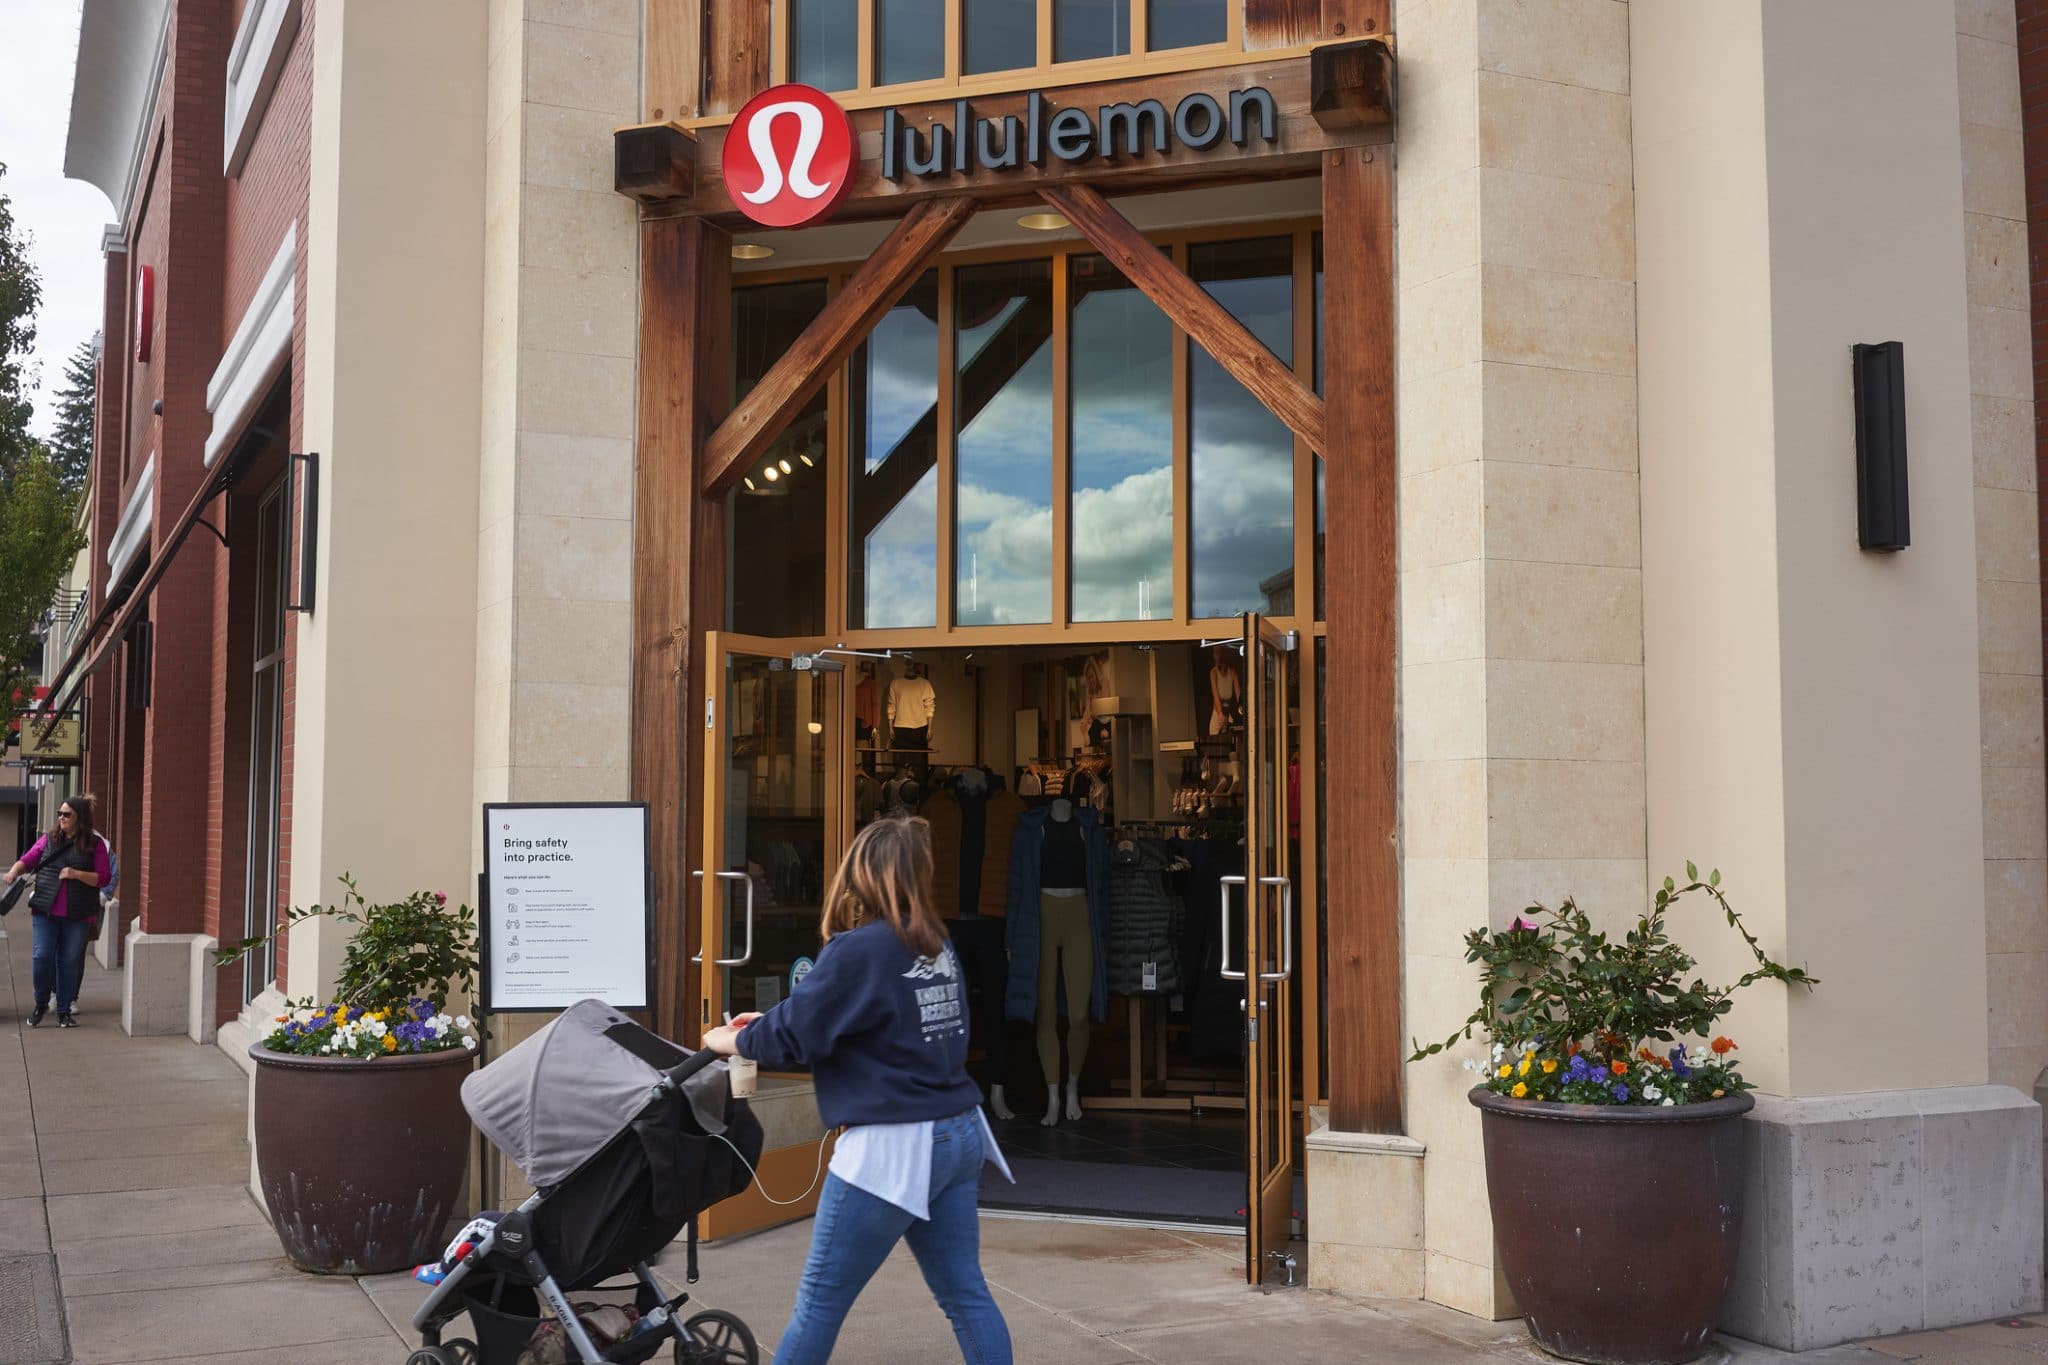 Lululemon Like New Trade In Program  International Society of Precision  Agriculture